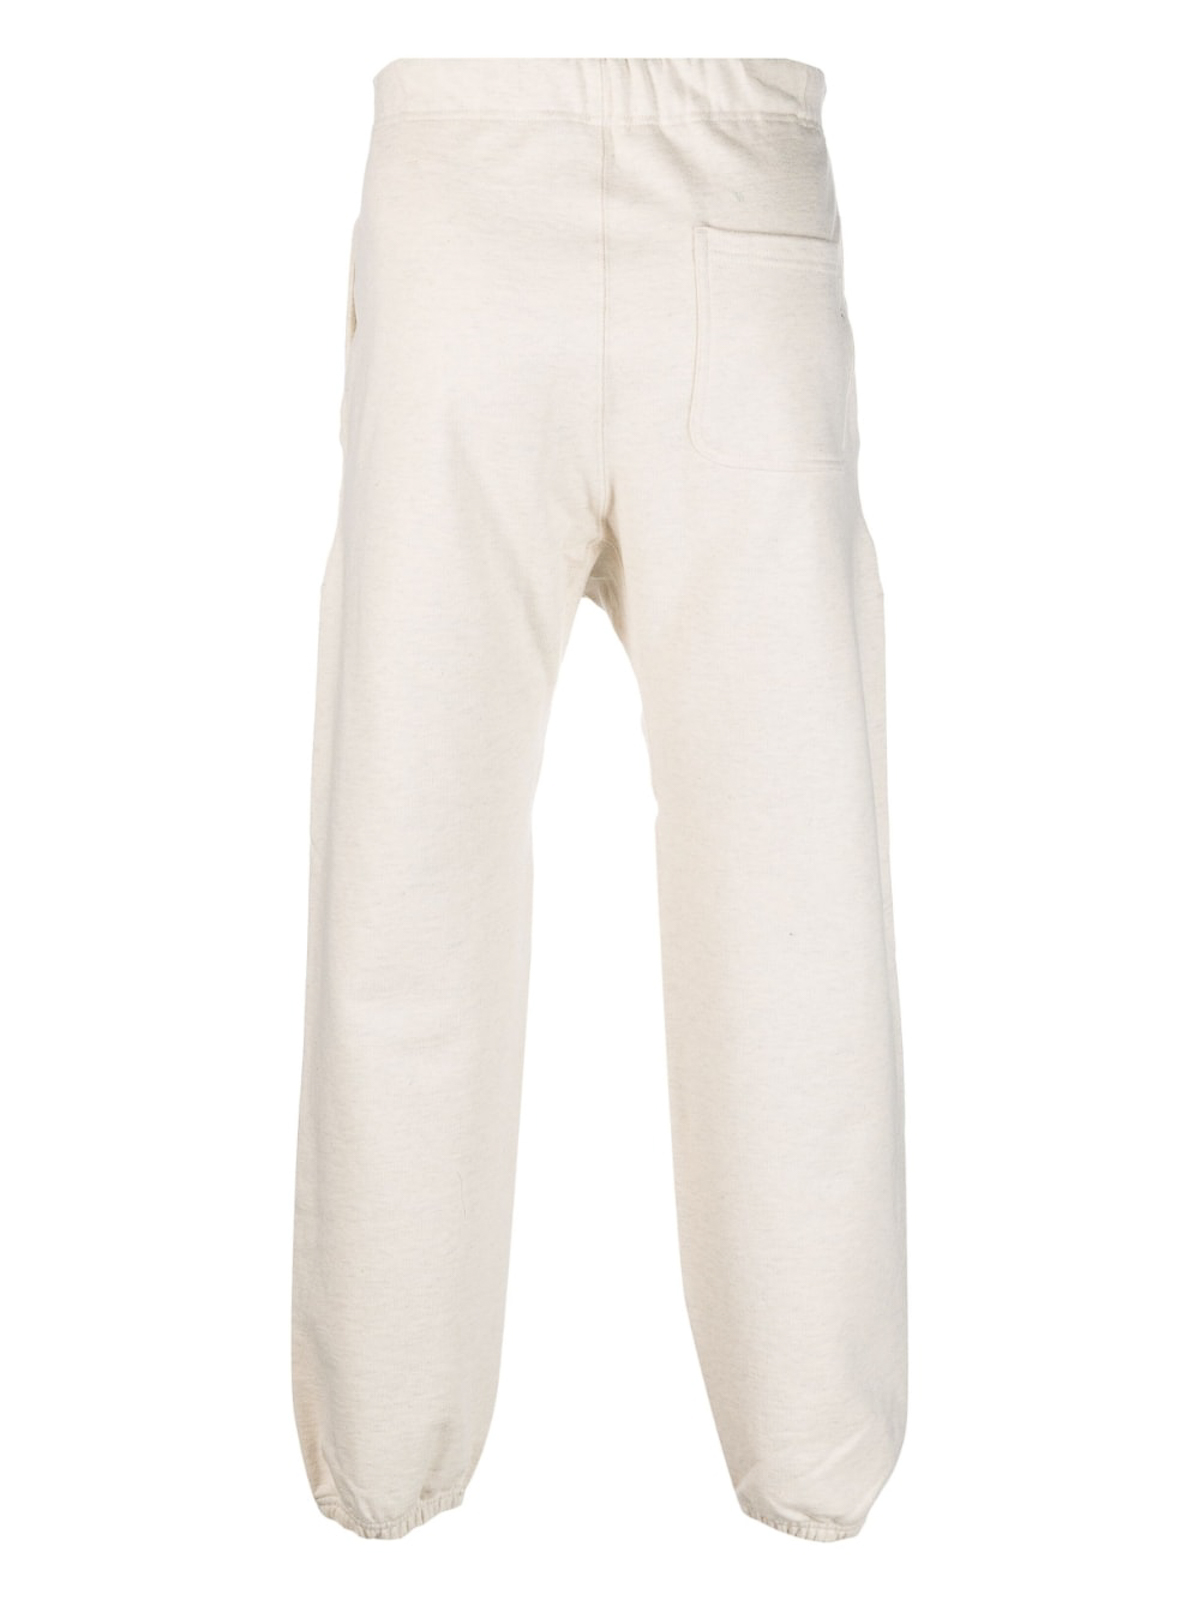 Trousers Shorts Snow Peak - Recycled cotton sweat pants - PA22SU403OM